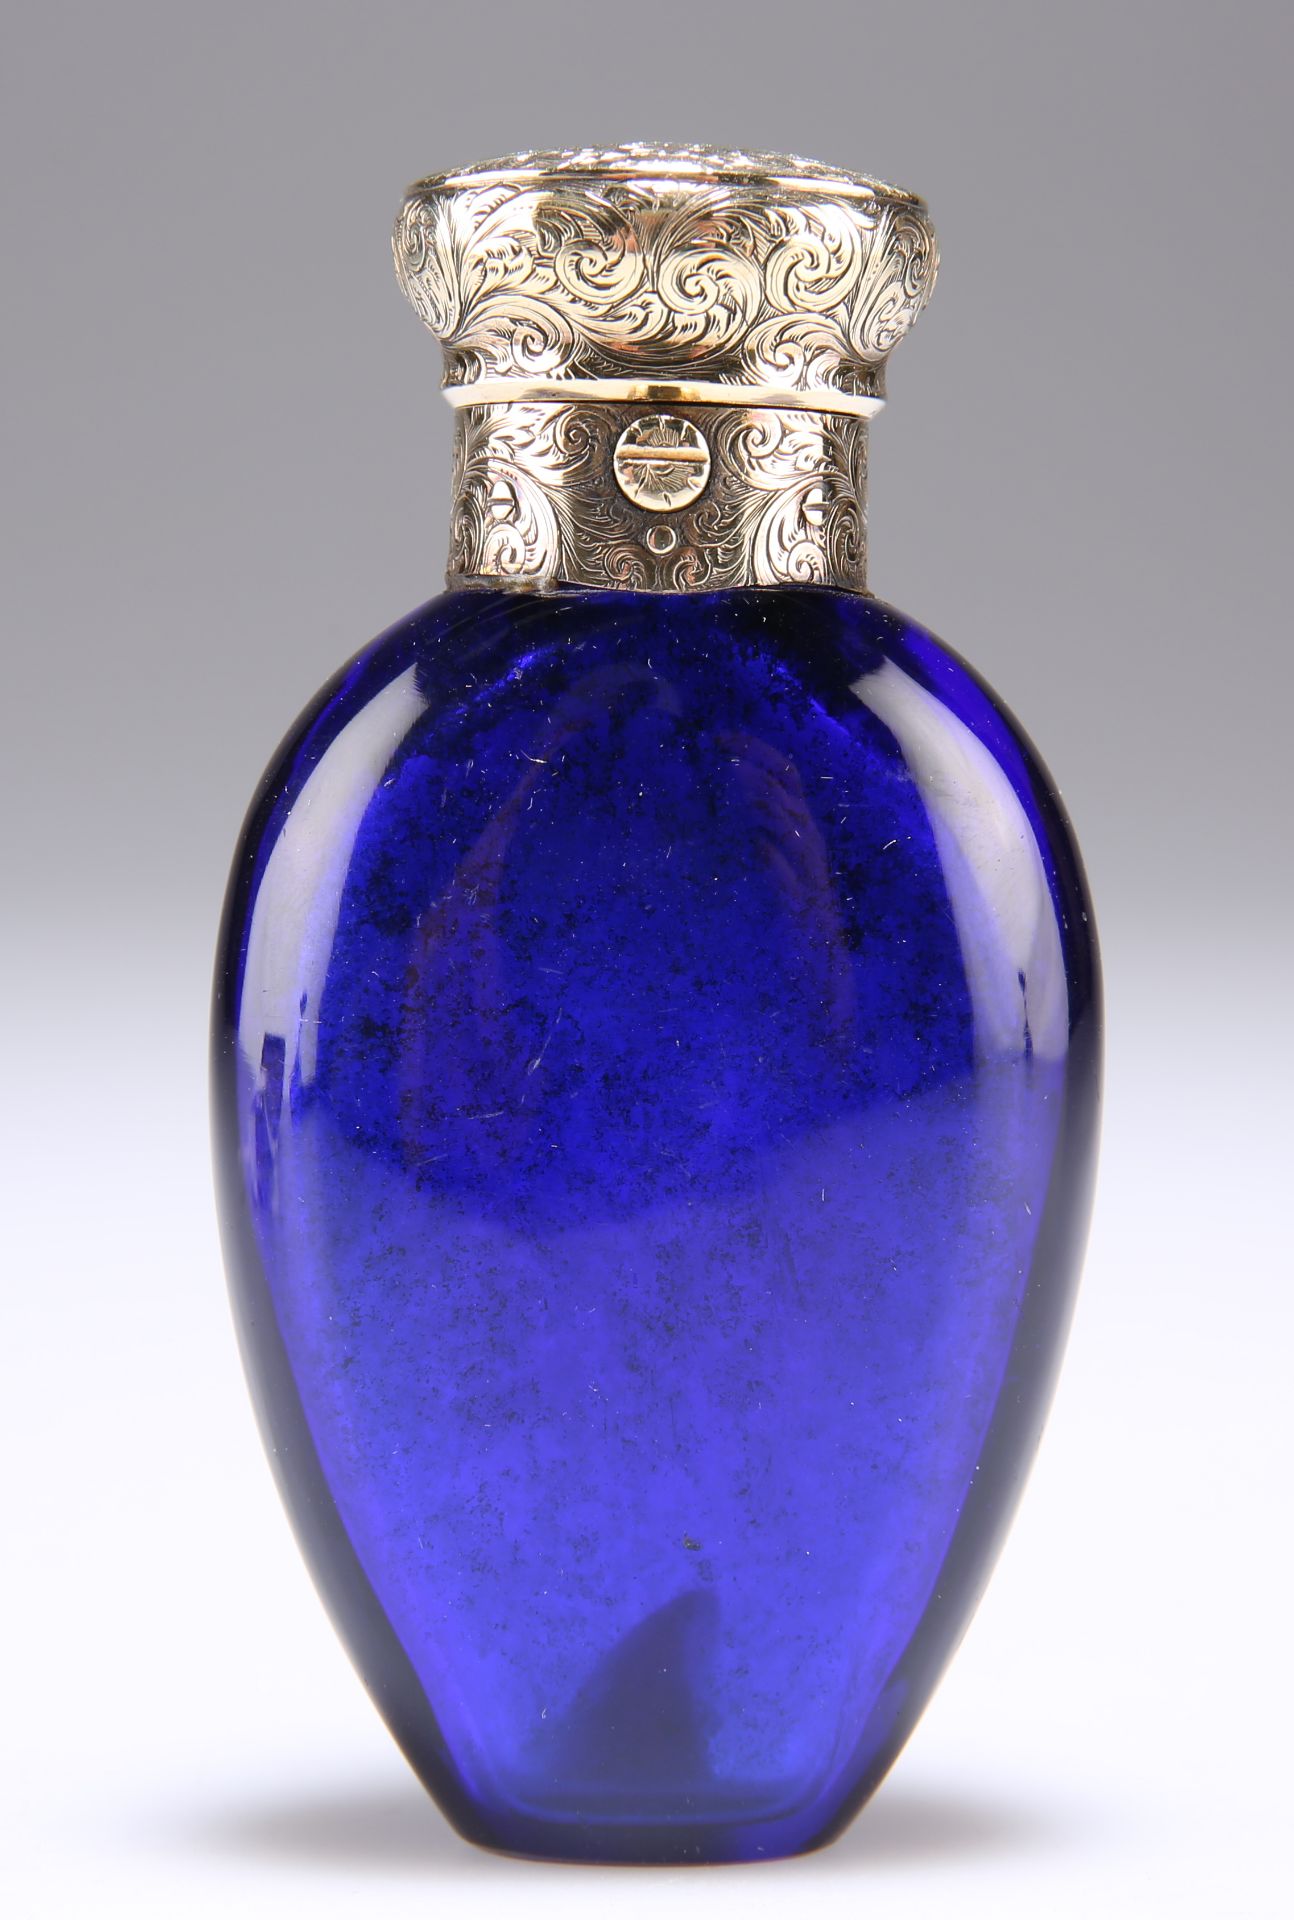 A VICTORIAN GOLD-MOUNTED BLUE-GLASS SCENT BOTTLE - Image 2 of 2